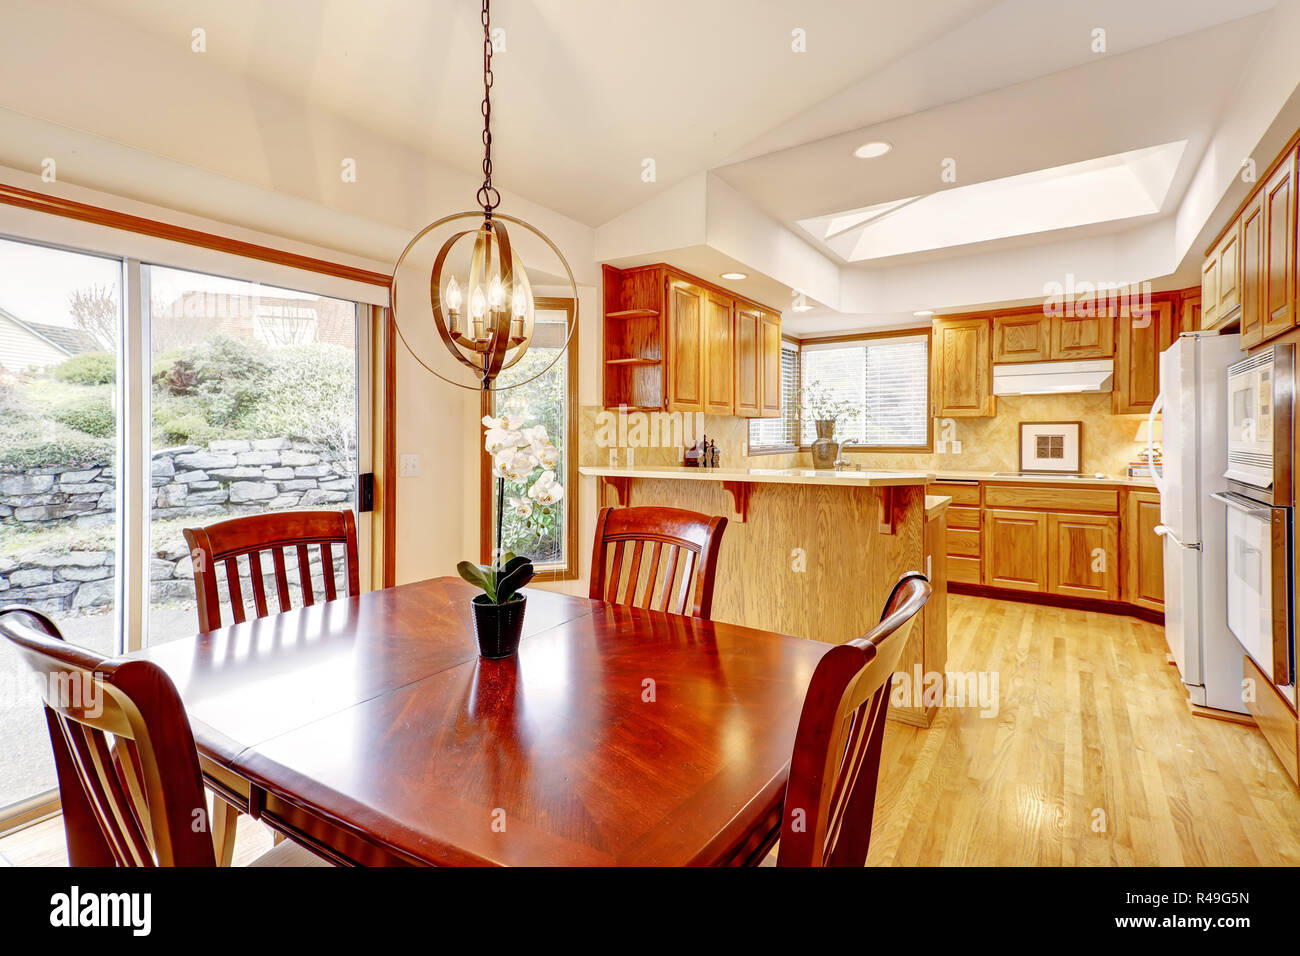 Kitchen Room Interior In American House With Cherry Wood Dining